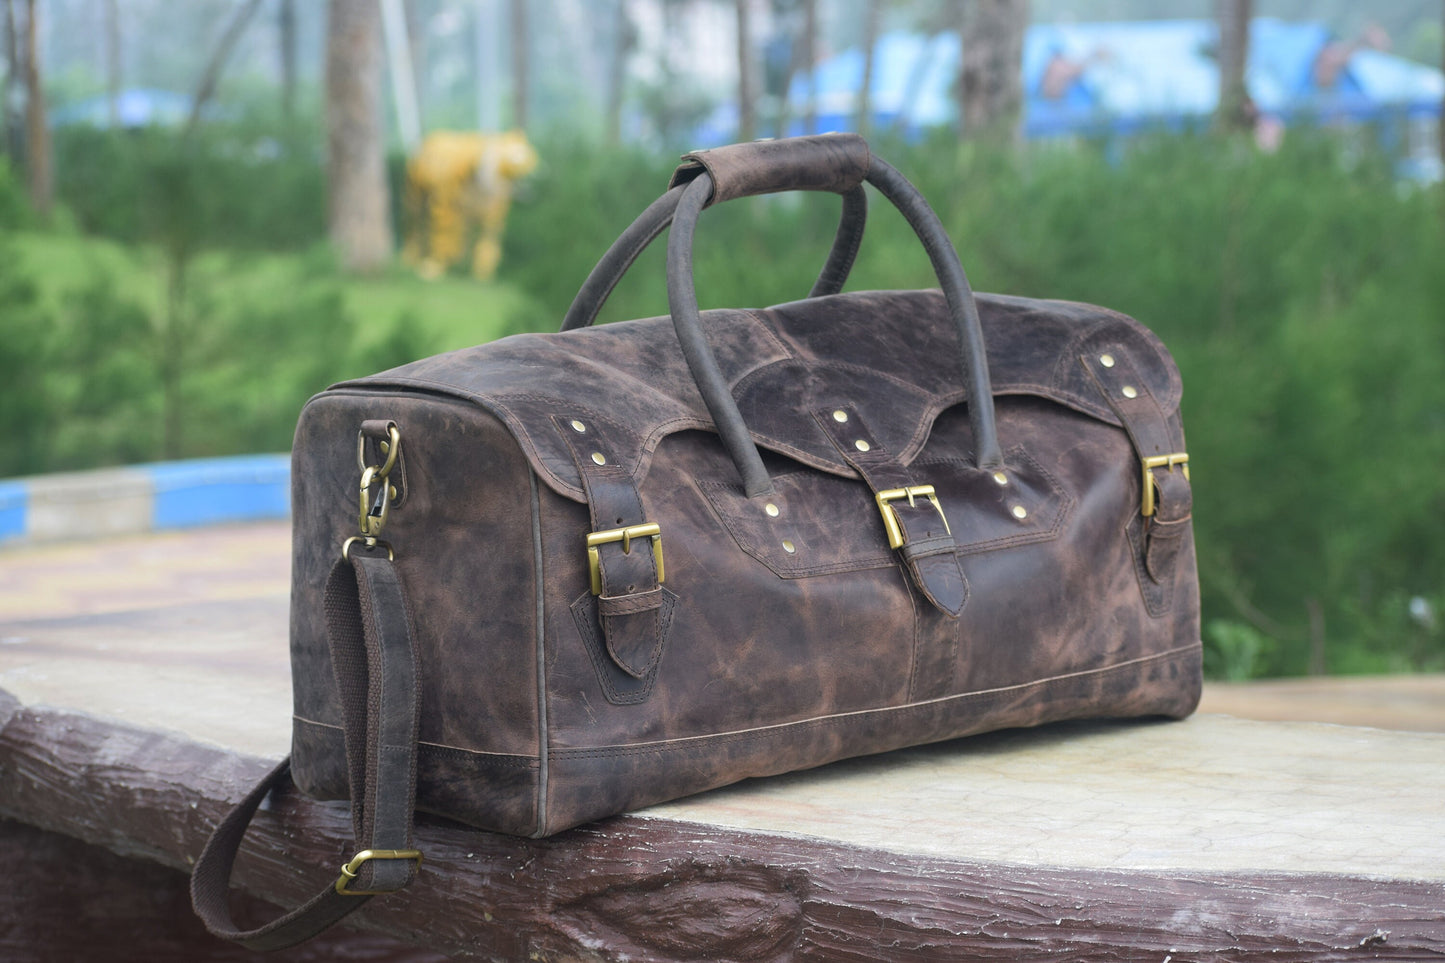 Handmade Leather Duffle Bag, Personalized Large Weekend Bag, Vacation Holidays Travel Bag, Best Men Gift, Groomsmen Gift, Leather Travel Bag